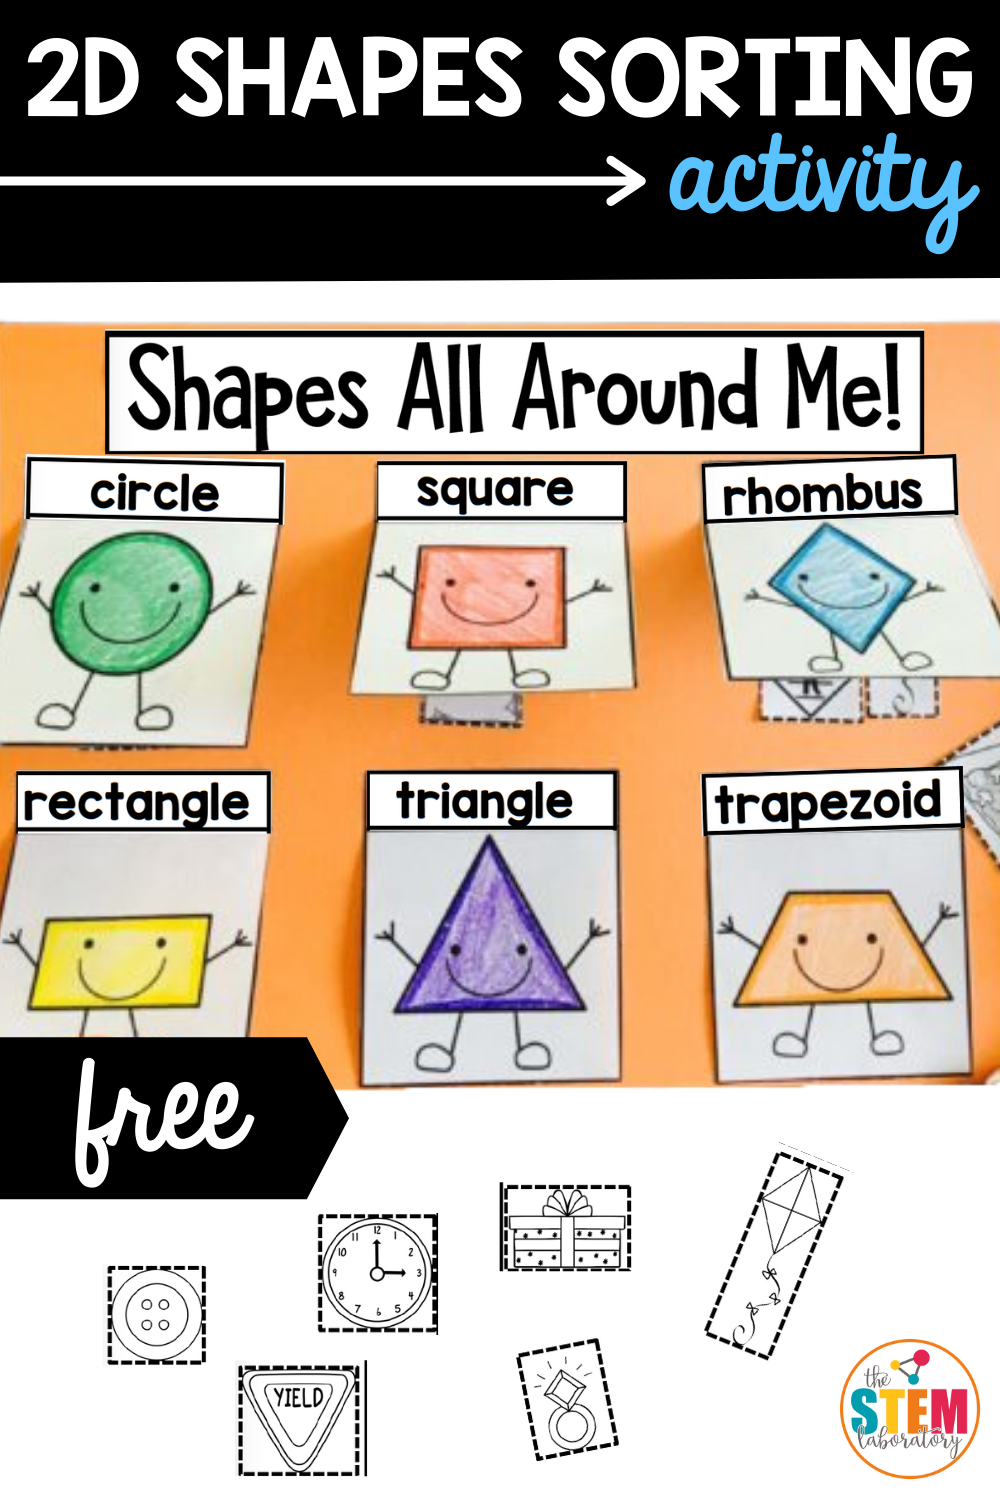 2D Shapes Sorting Activity The Stem Laboratory